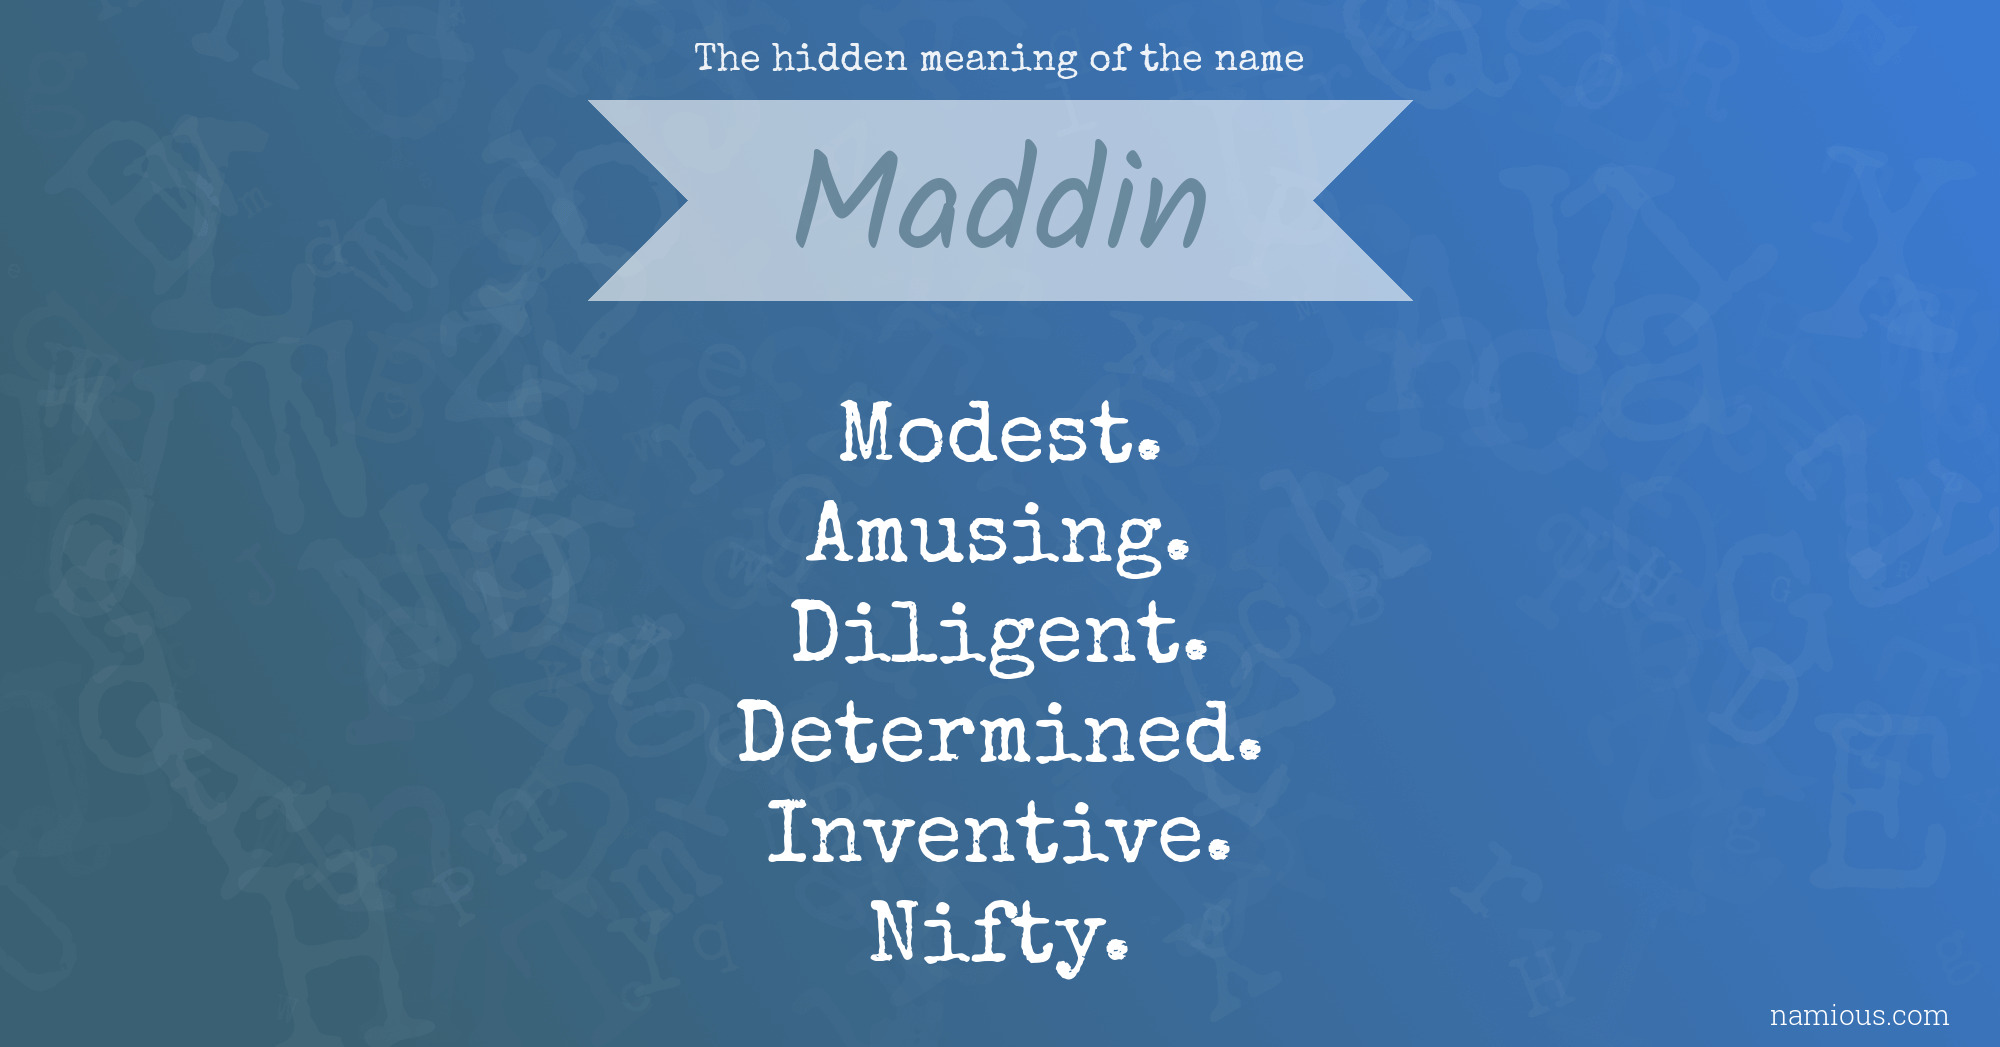 The hidden meaning of the name Maddin